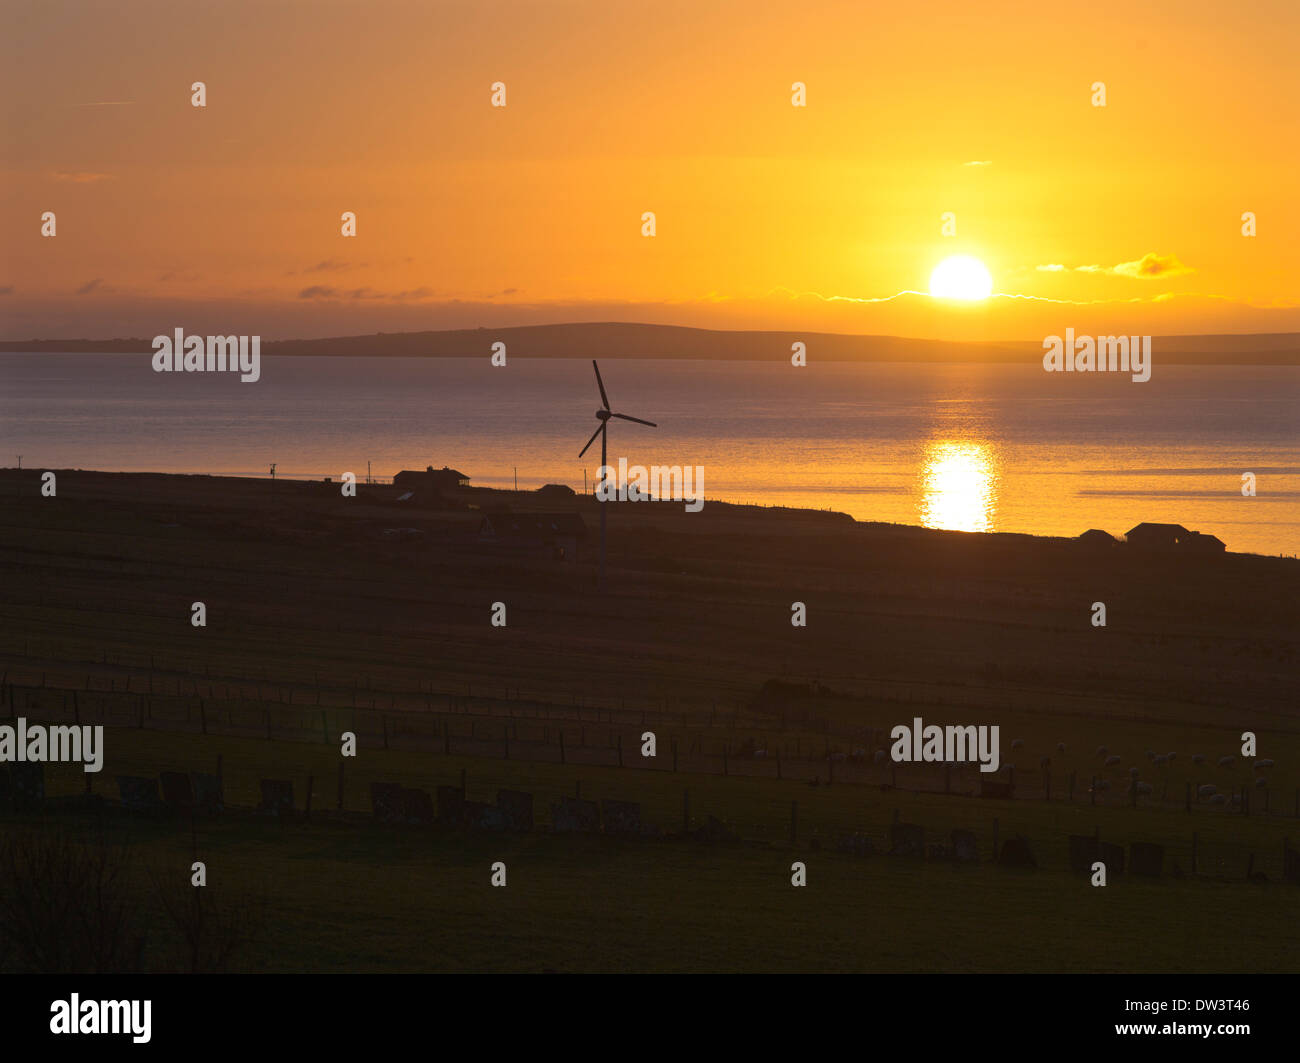 dh Scapa Flow ORPHIR ORKNEY Sunrise wind turbine cottages sea uk scotland dawn house sun rise up over field Stock Photo